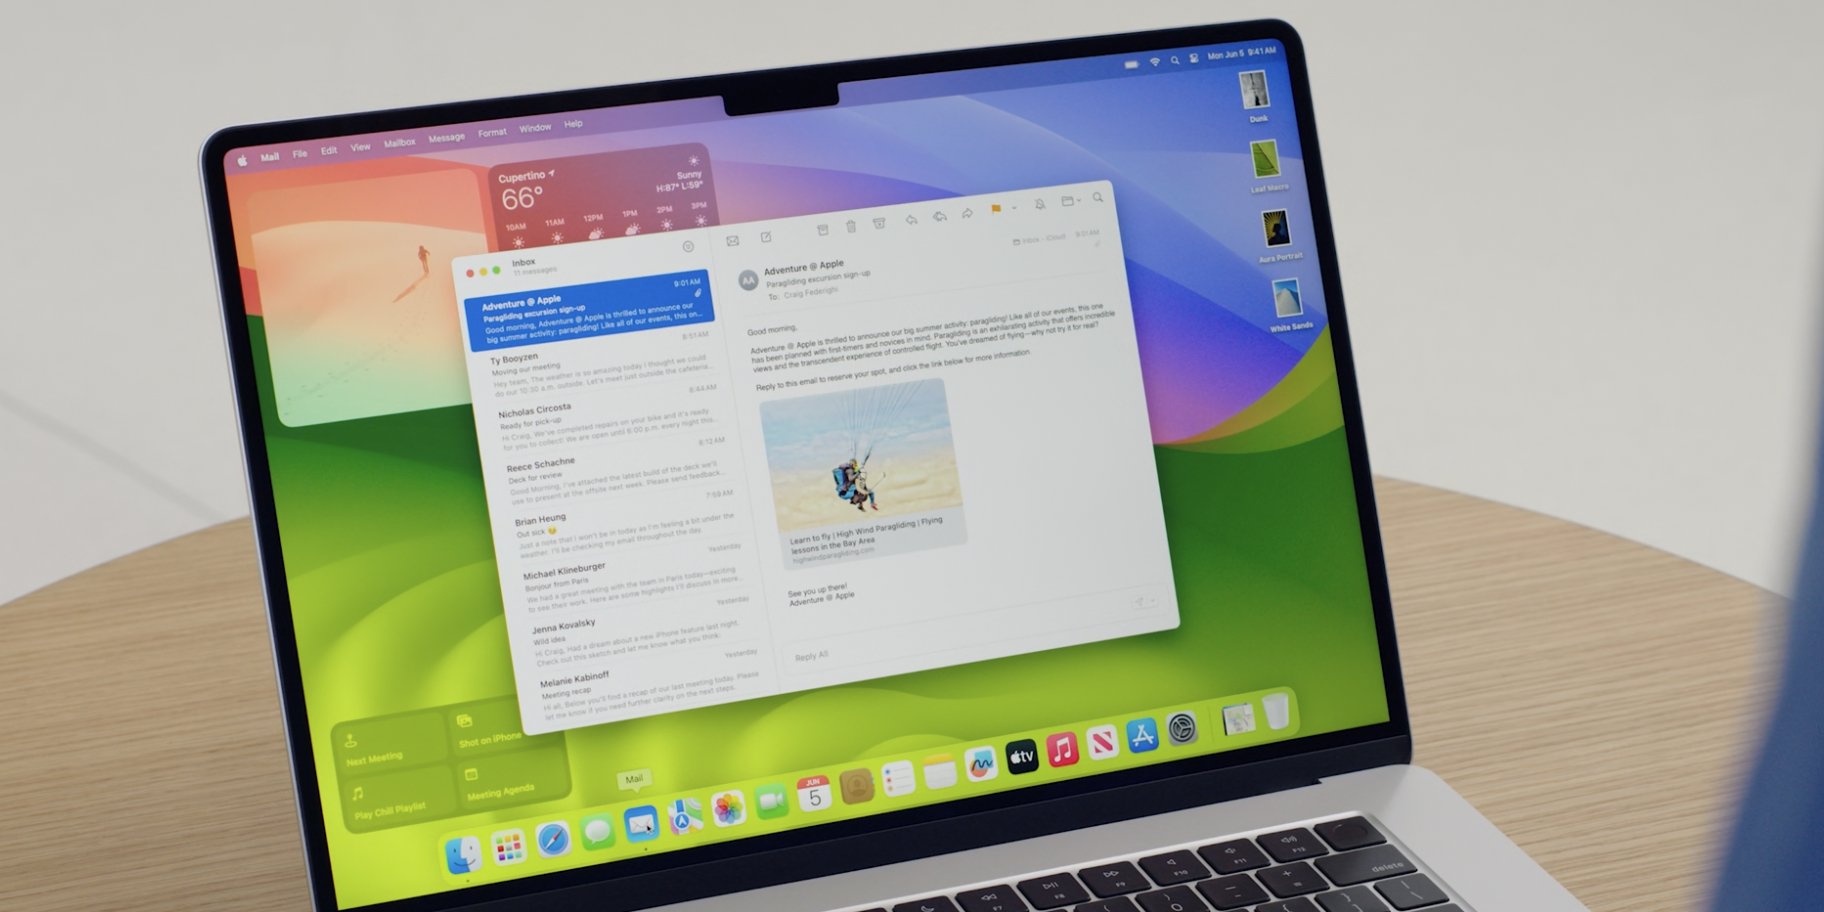 Apple introduced macOS Sonoma with desktop widgets and Game mode